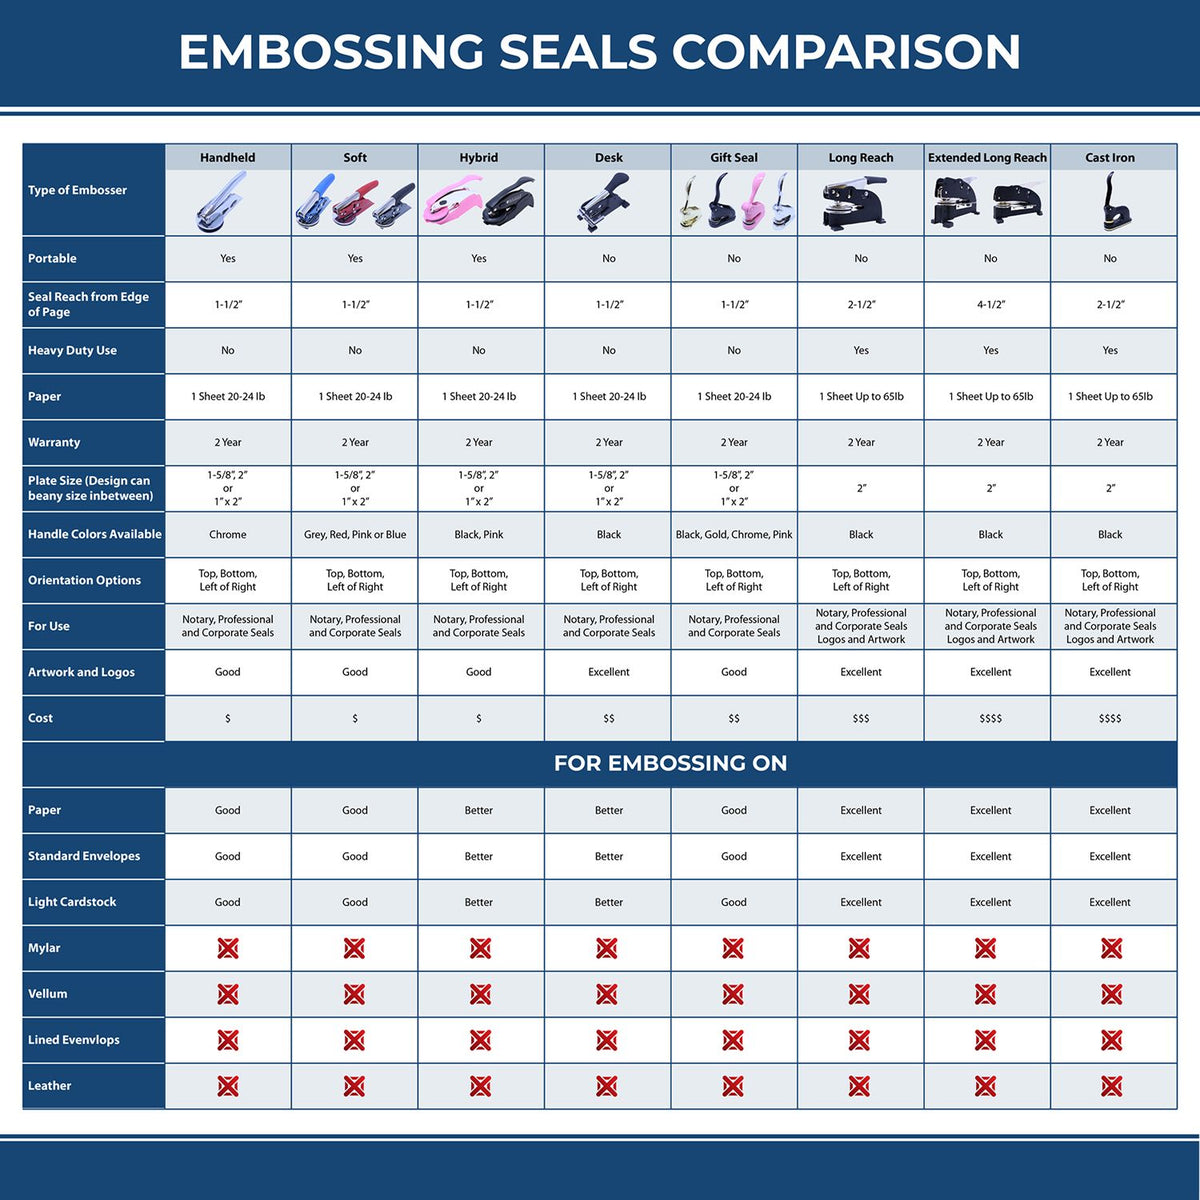 A comparison chart for the different types of mount models available for the State of Idaho Extended Long Reach Geologist Seal